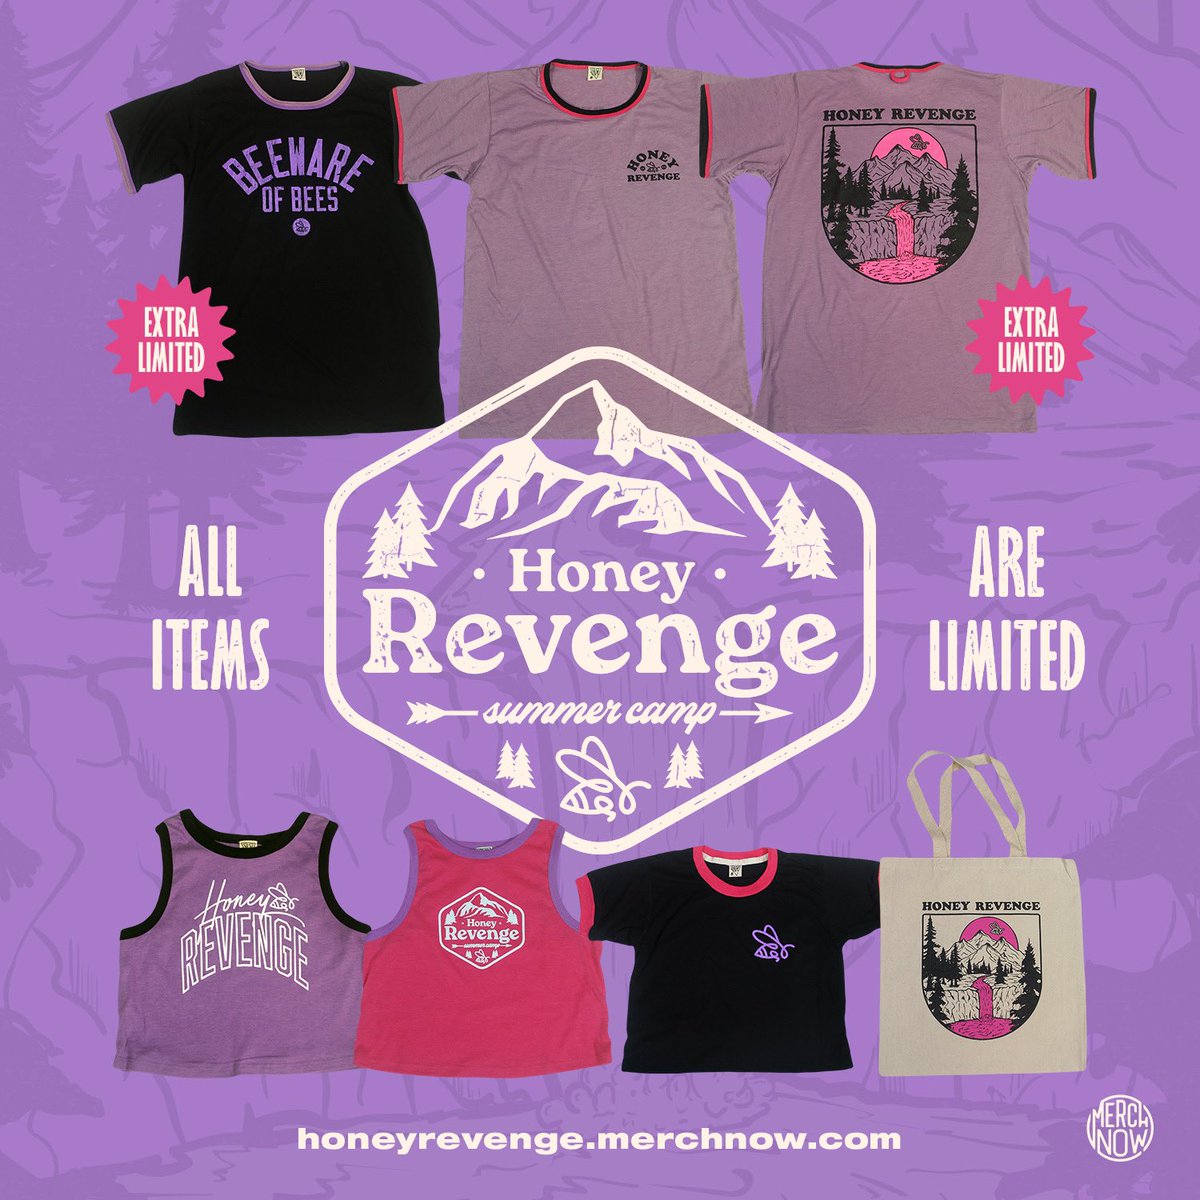 new merch who dis Our brand new and super limited line of merch is available now at honeyrevenge.merchnow.com